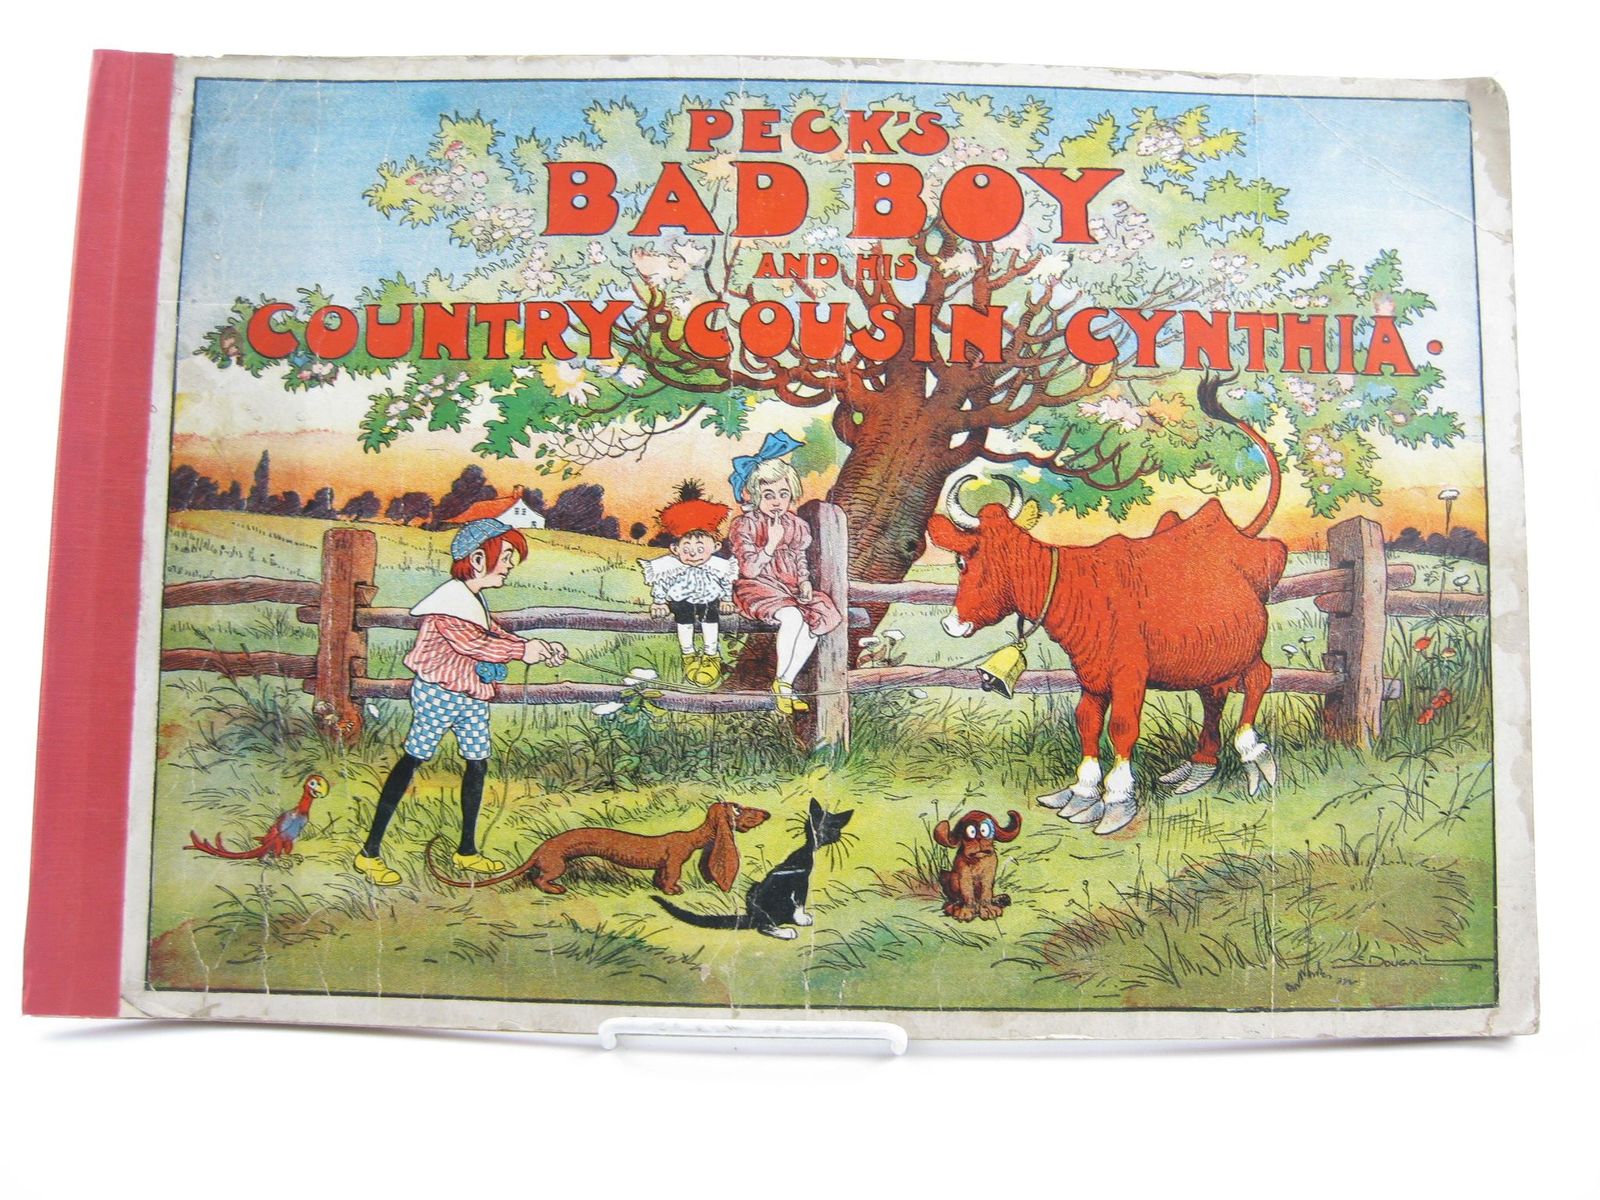 Photo of PECK'S BAD BOY AND HIS COUNTRY COUSIN CYNTHIA written by Peckham, George W. illustrated by McDougall, Walter published by Stanton And Van Vliet Co. (STOCK CODE: 1310981)  for sale by Stella & Rose's Books